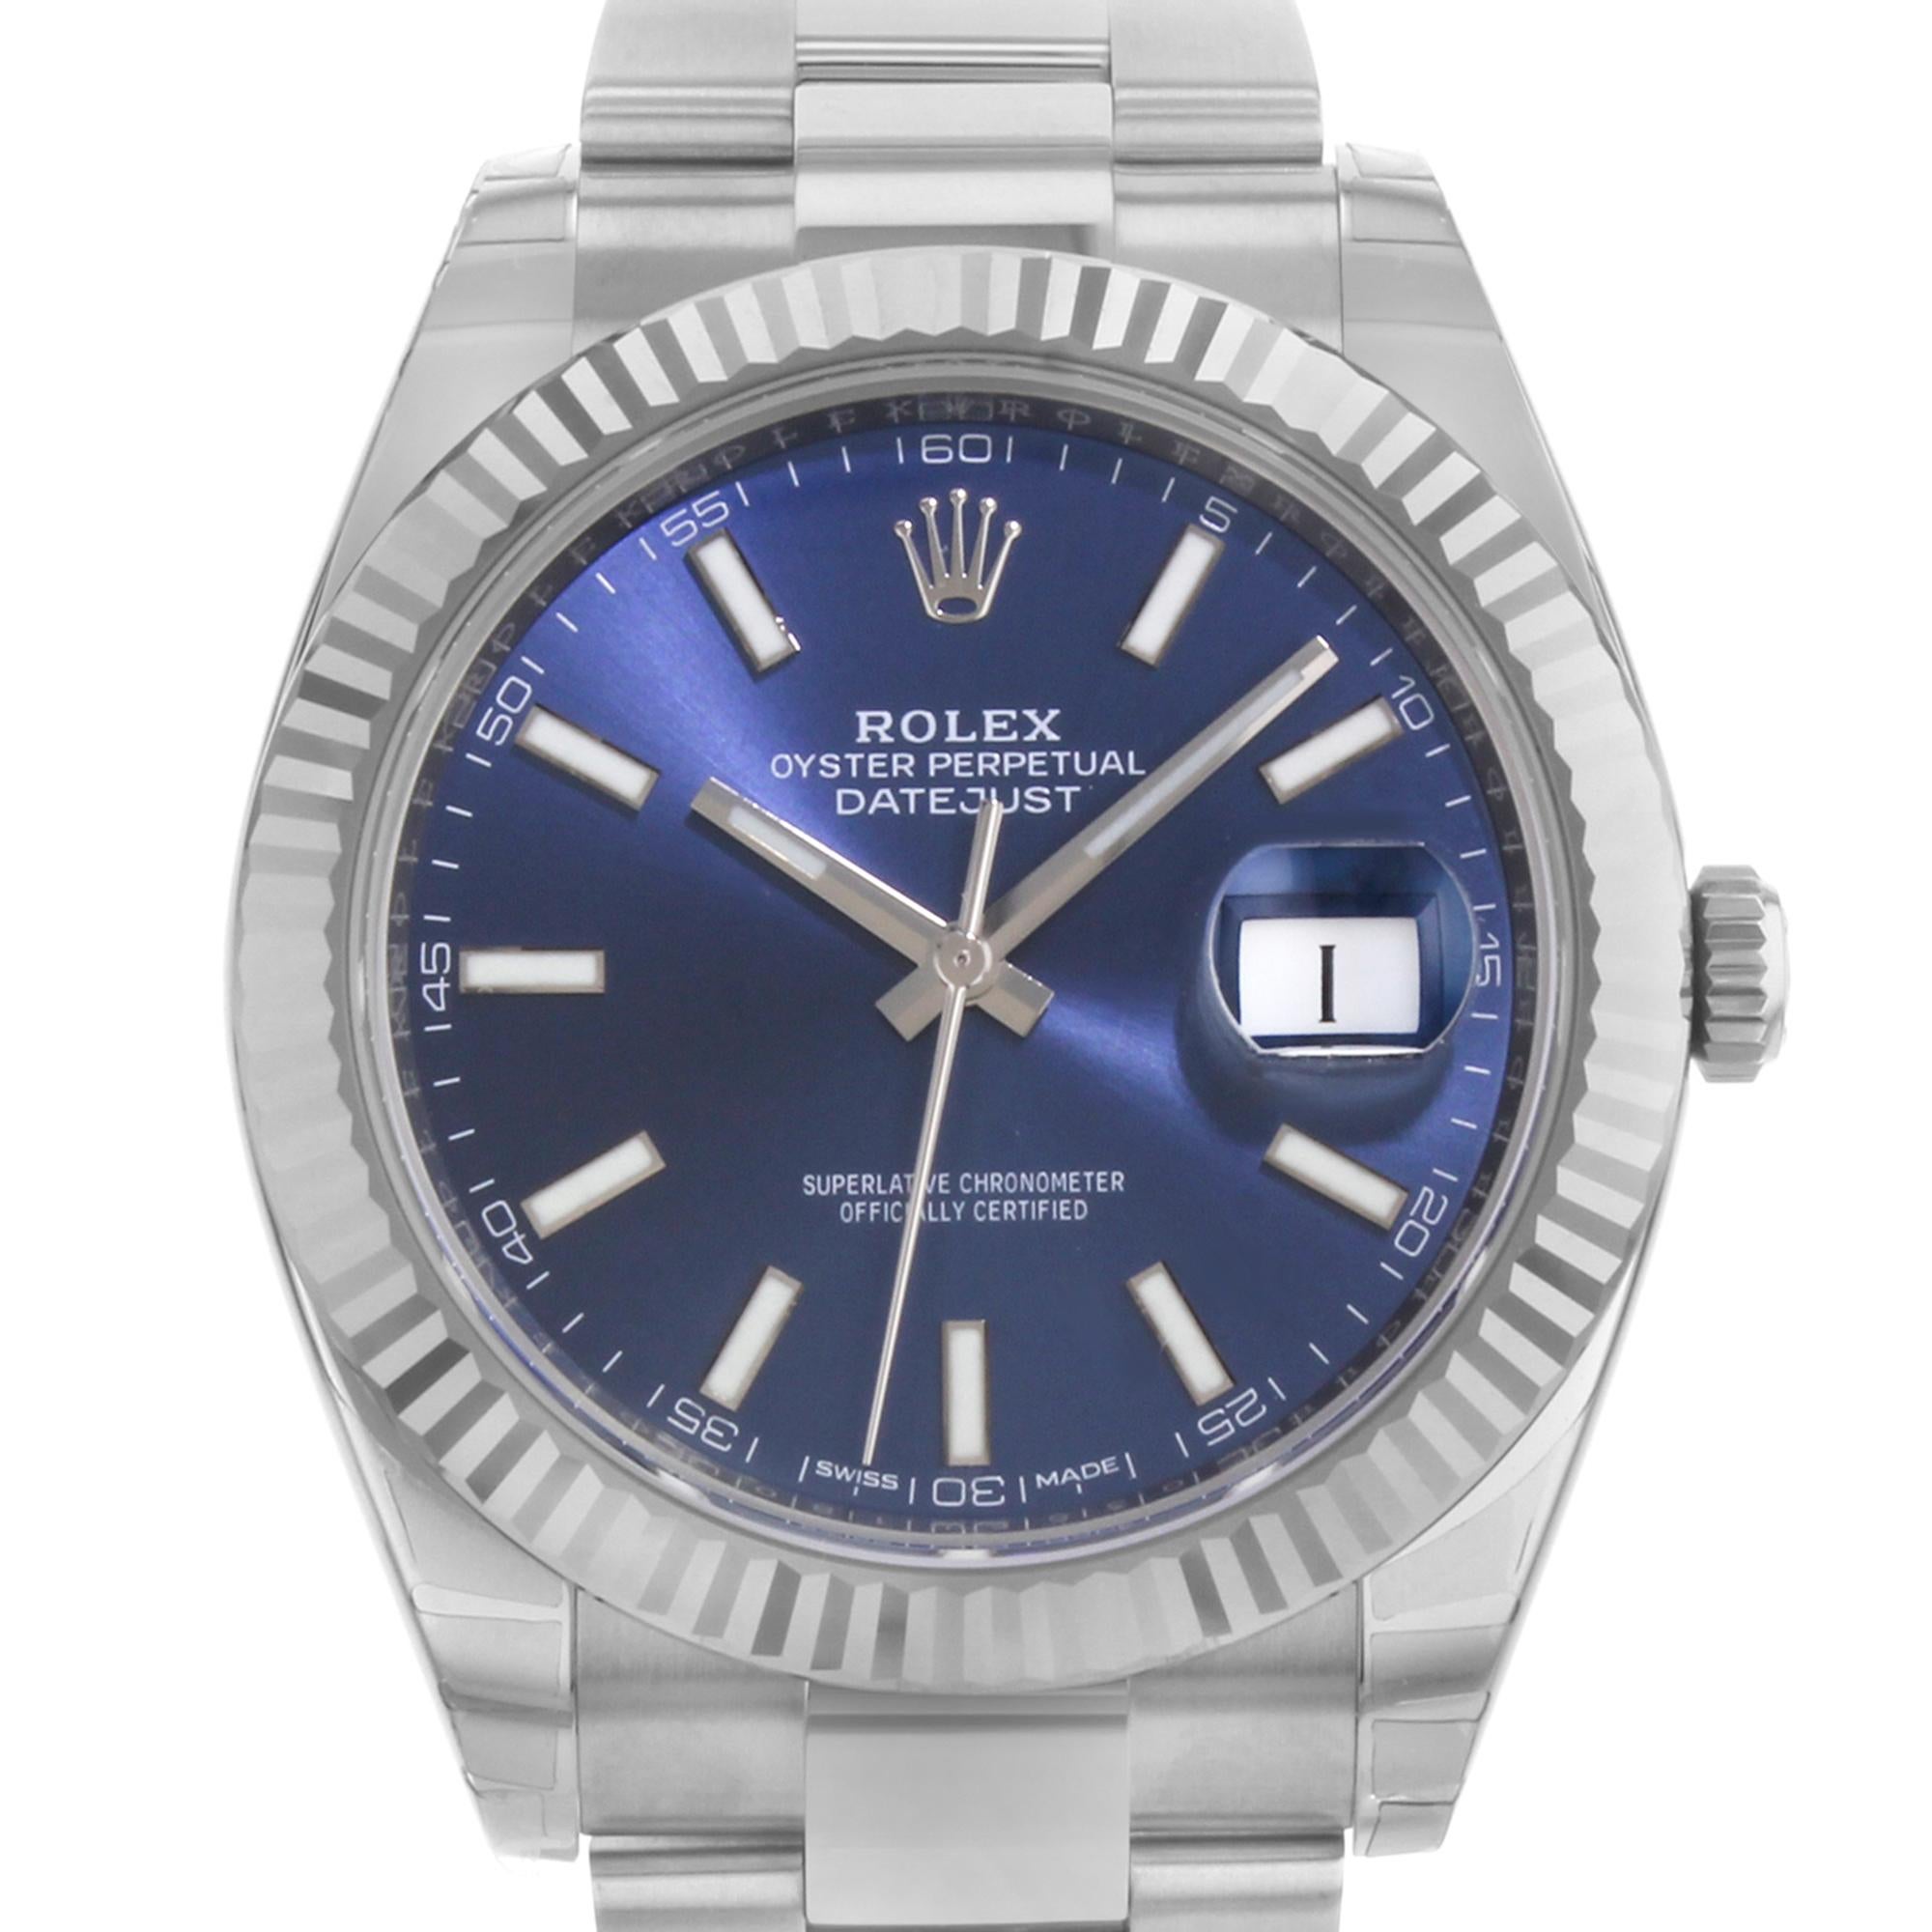 This brand new Rolex Datejust 41 126334 is a beautiful men's timepiece that is powered by mechanical (automatic) movement which is cased in a stainless steel case. It has a round shape face, date indicator dial and has hand sticks style markers. It